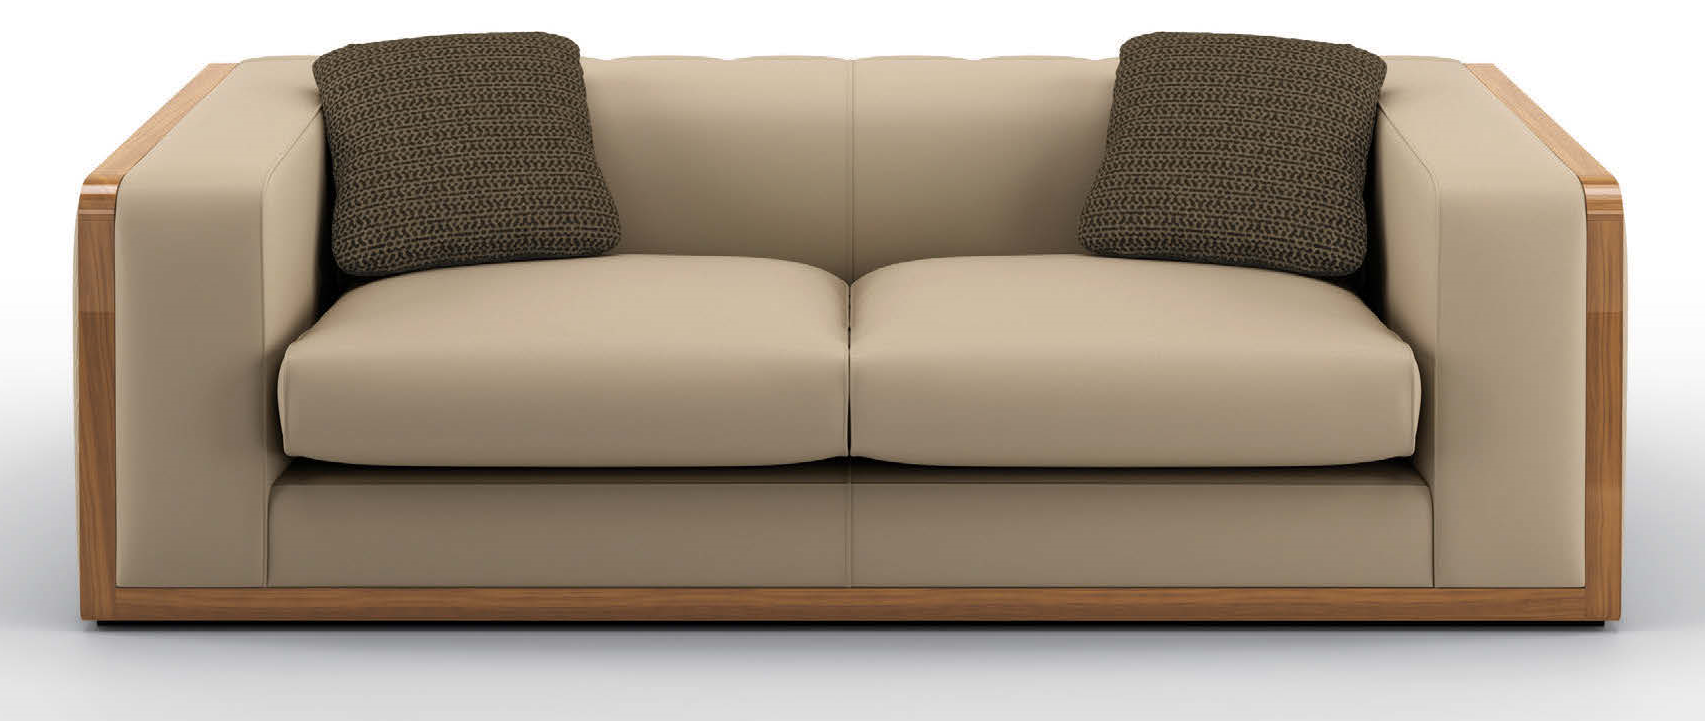 SOFA, COUCH & LOVESEAT Luxurious Grecian Olive Sofa